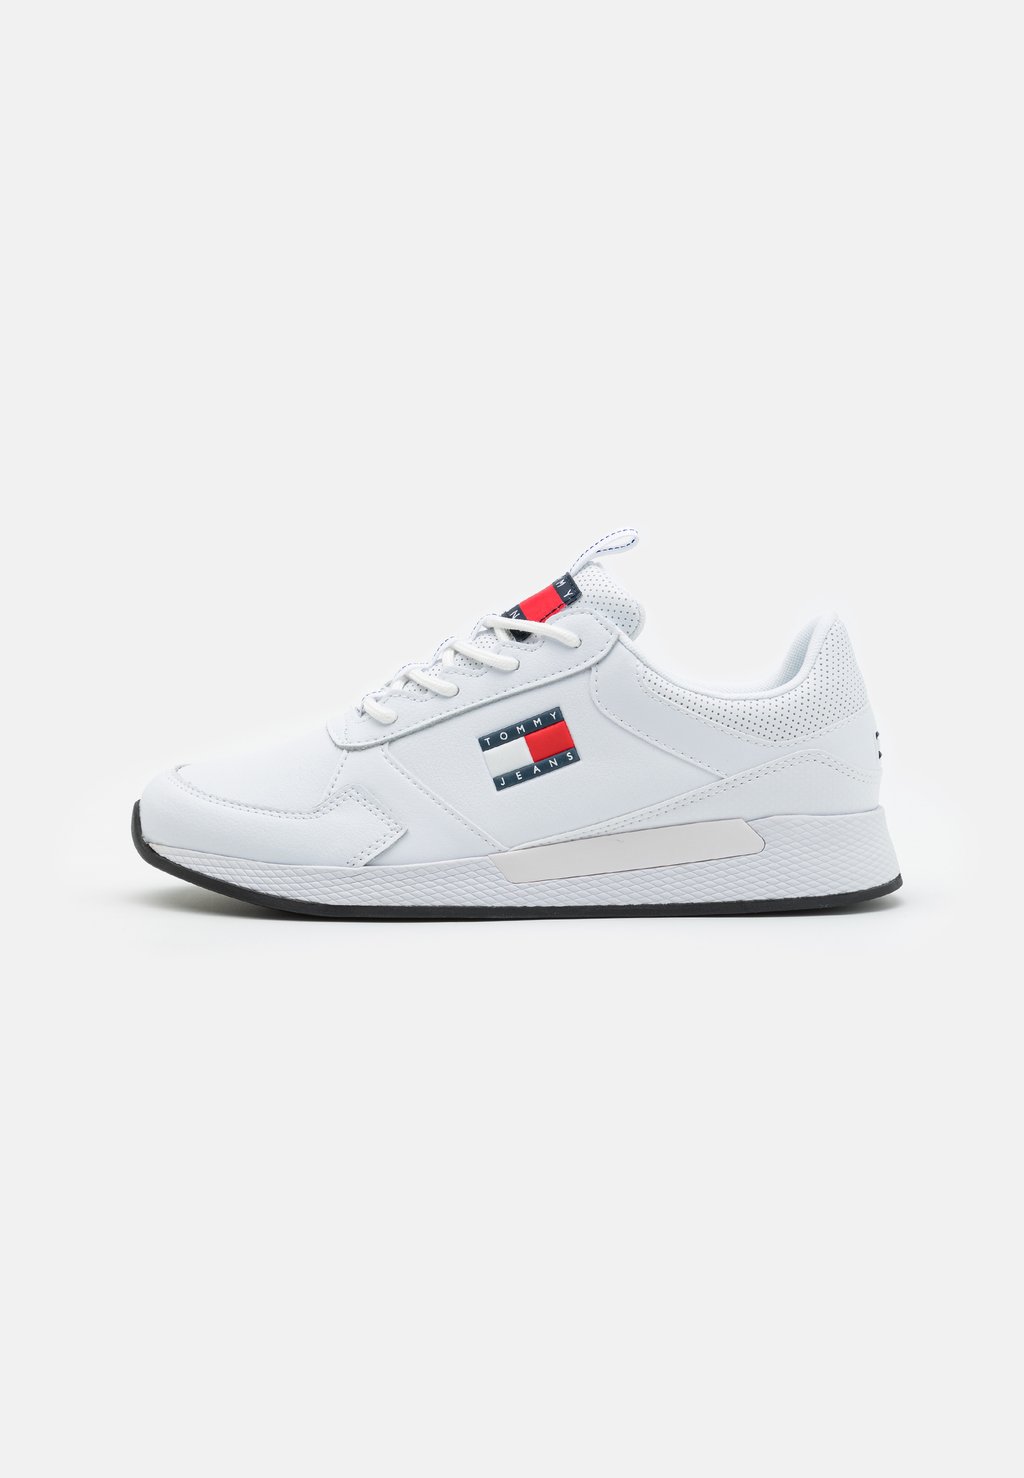 Кроссовки Tommy Jeans FLEXI RUNNER, белый кроссовки tommy jeans flexi runner white